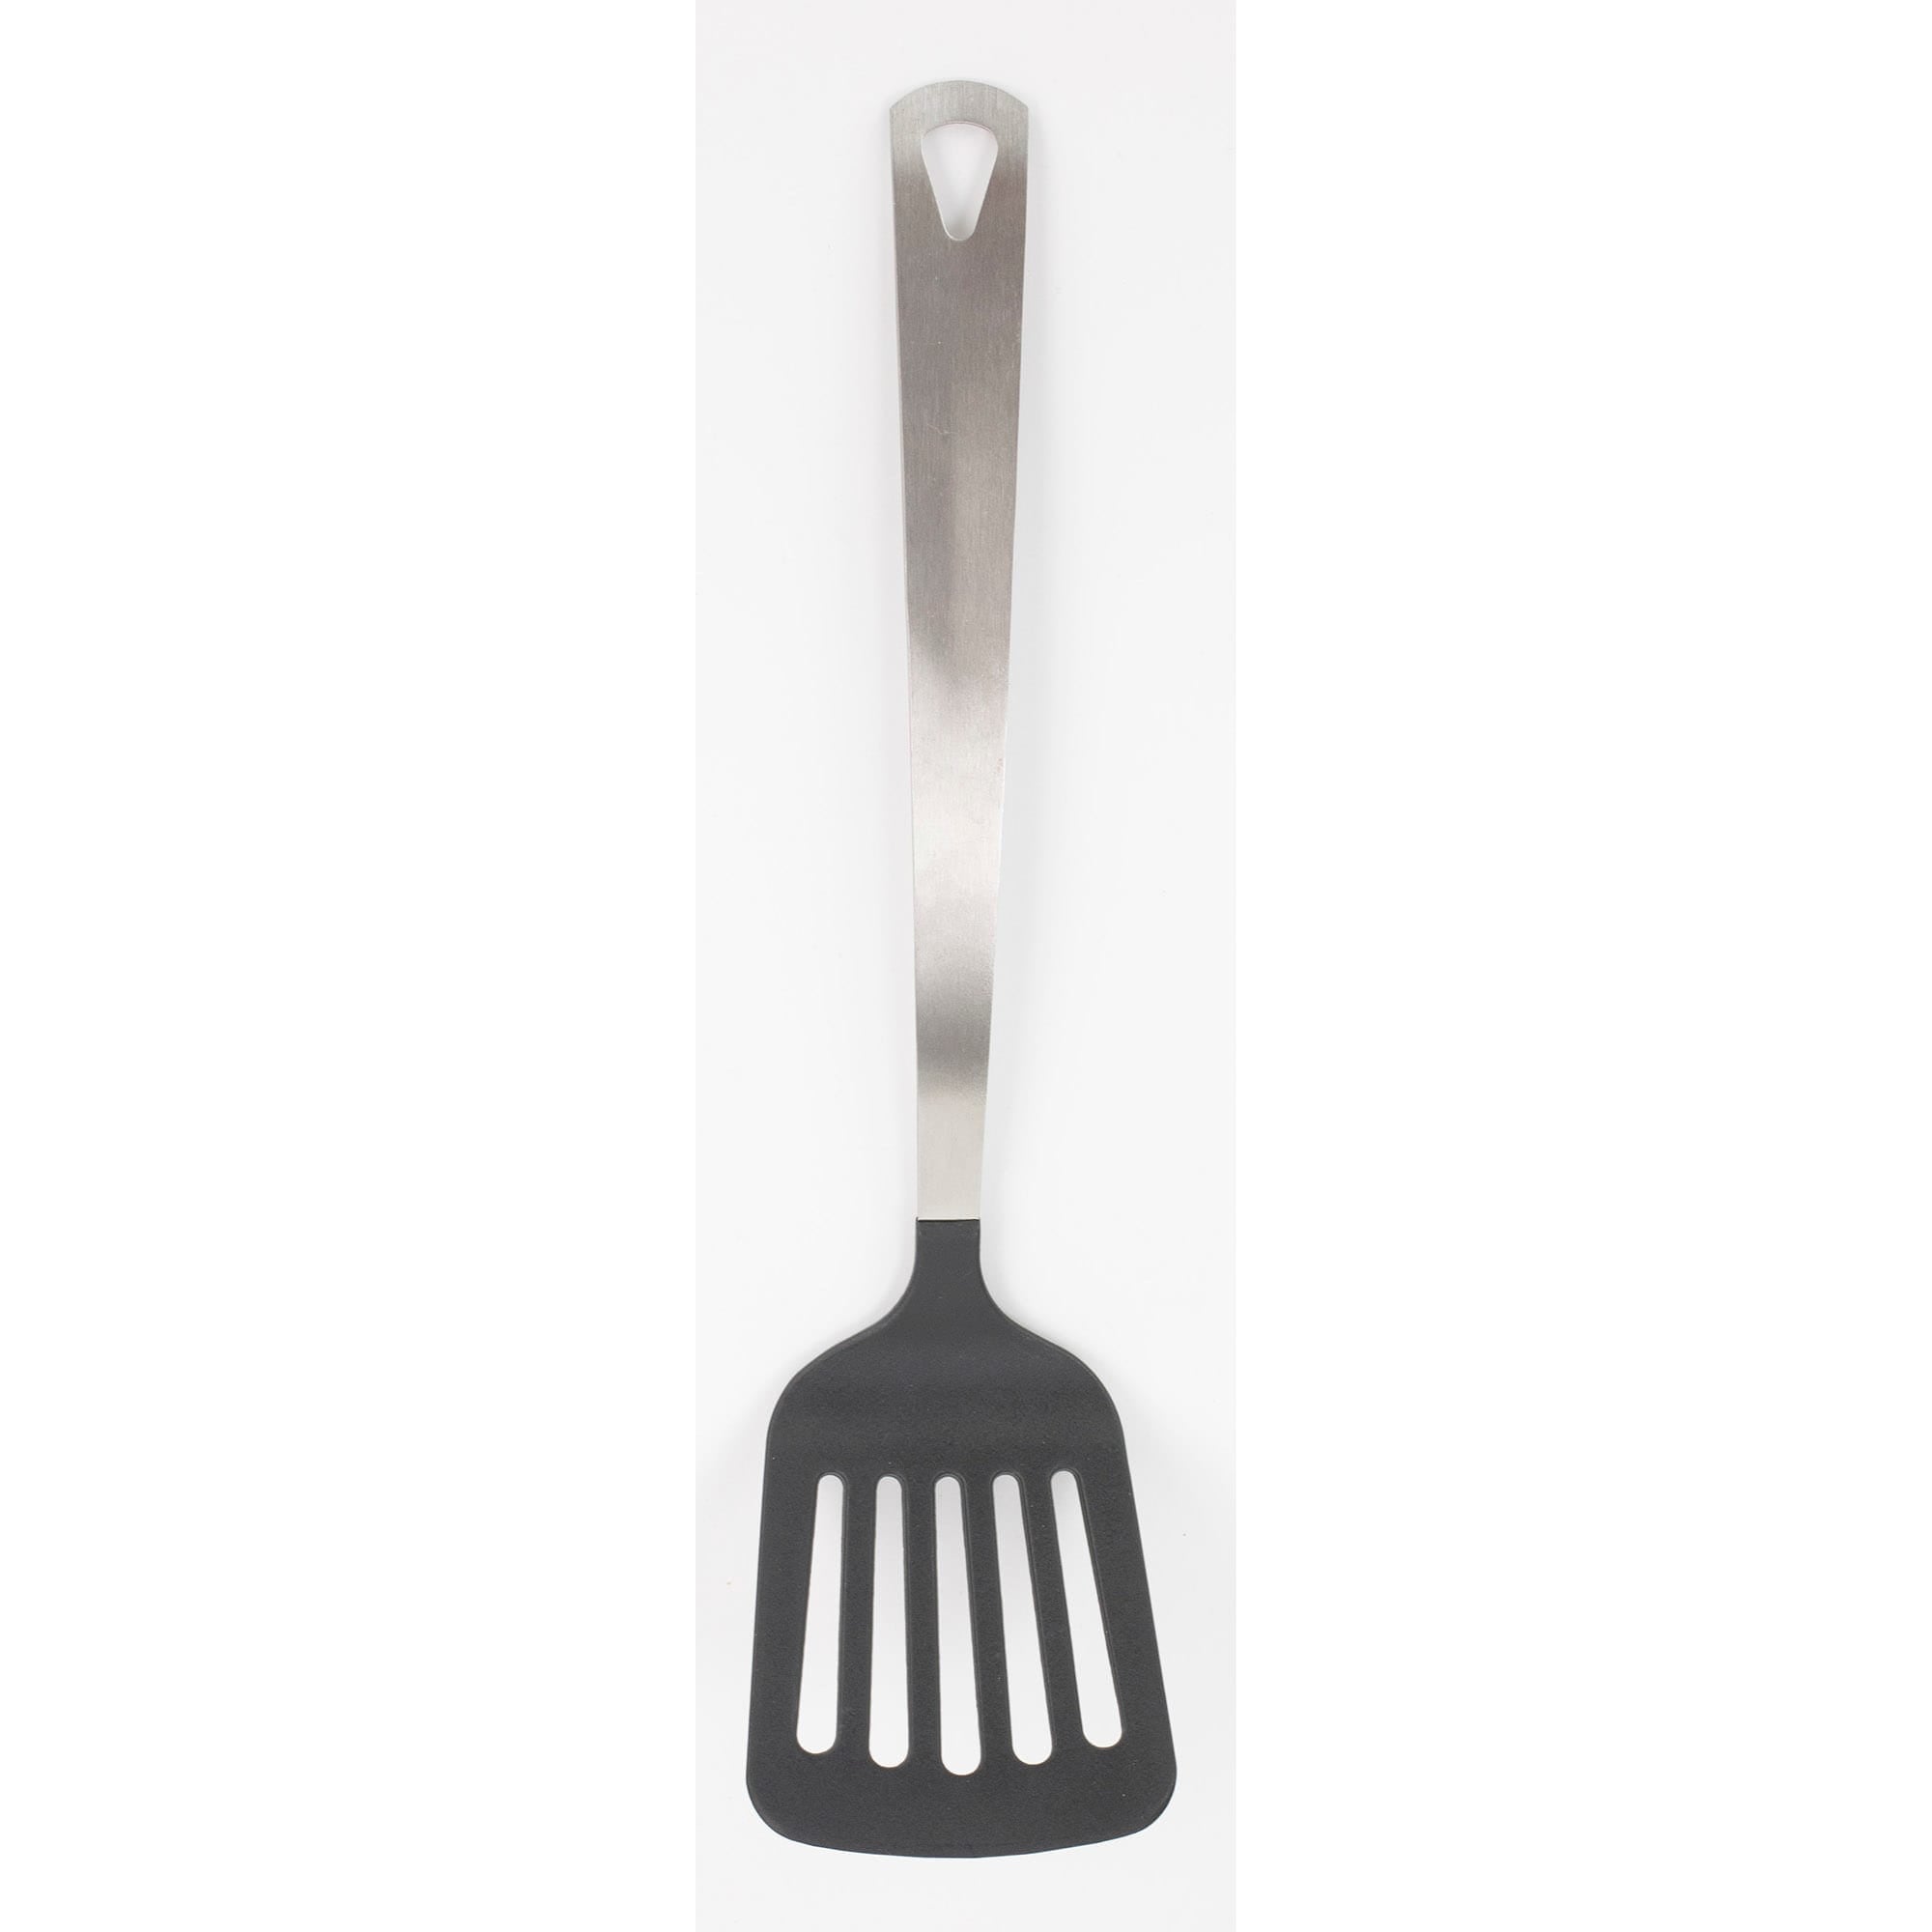 Home Basics Nylon Slotted Turner with Stainless Steel Handle, Black $1.50 EACH, CASE PACK OF 24